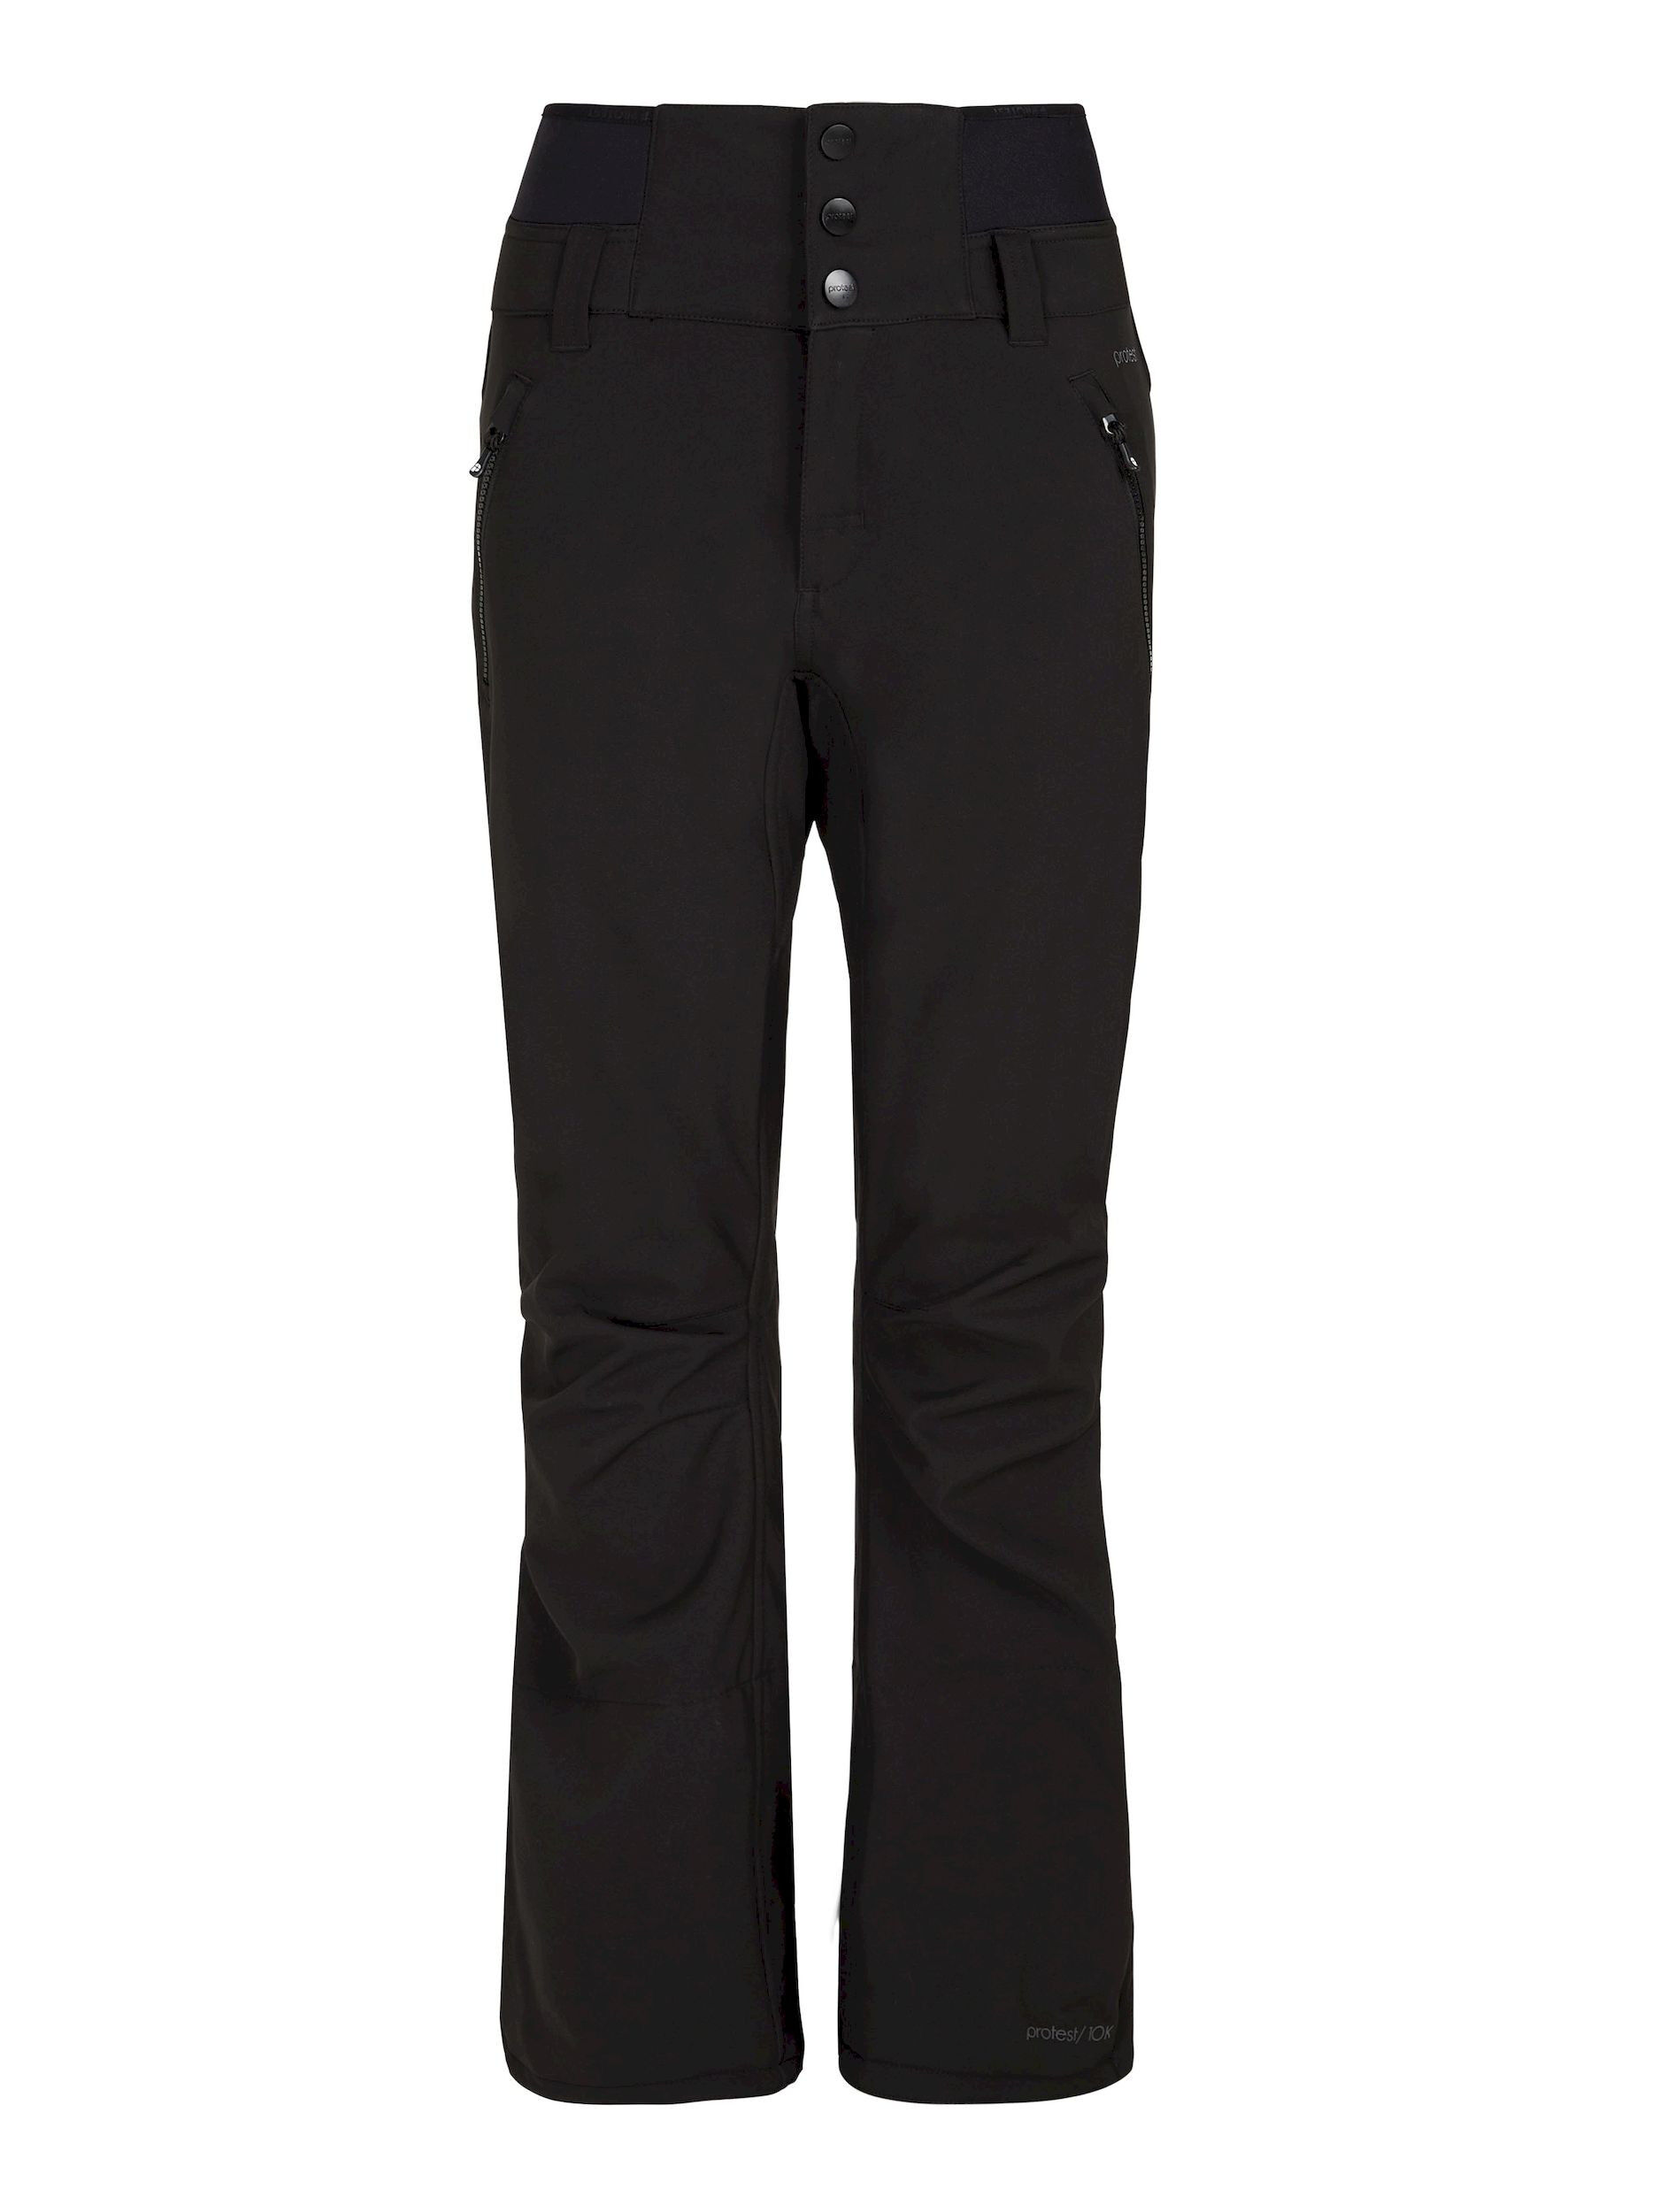 Protest Prtlullaby - Softshell trousers - Women's